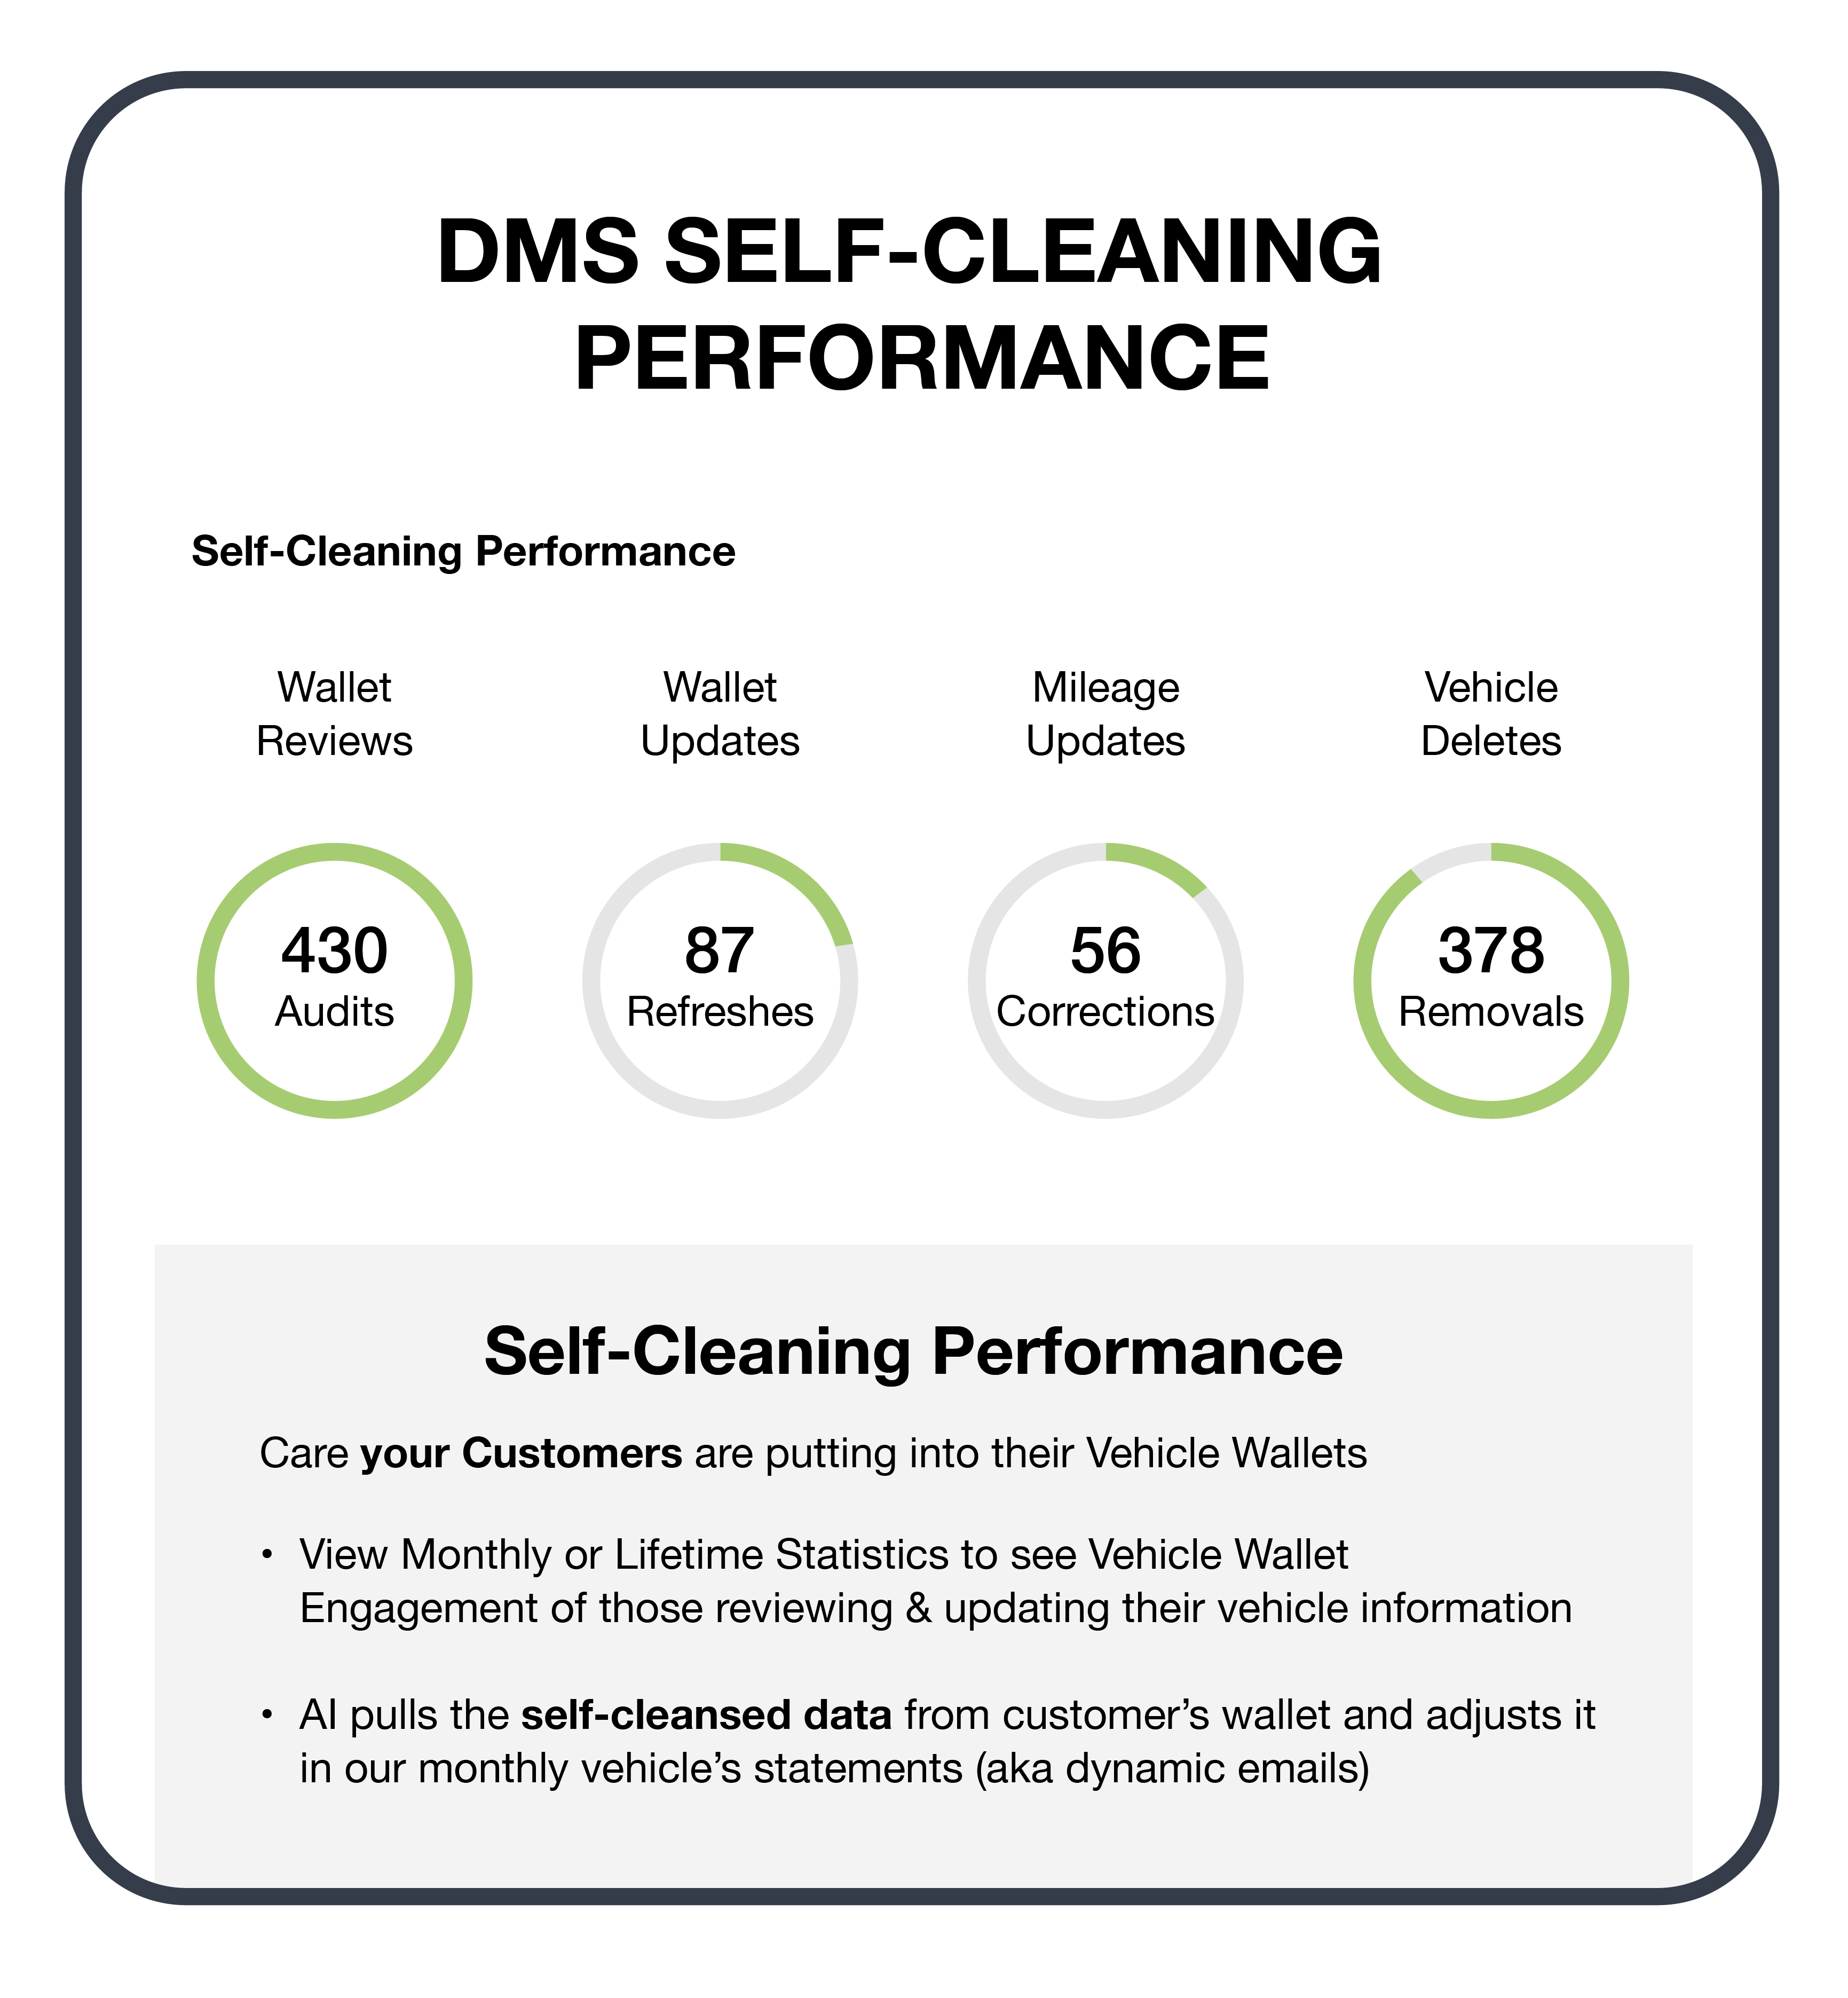 dms self-cleaning